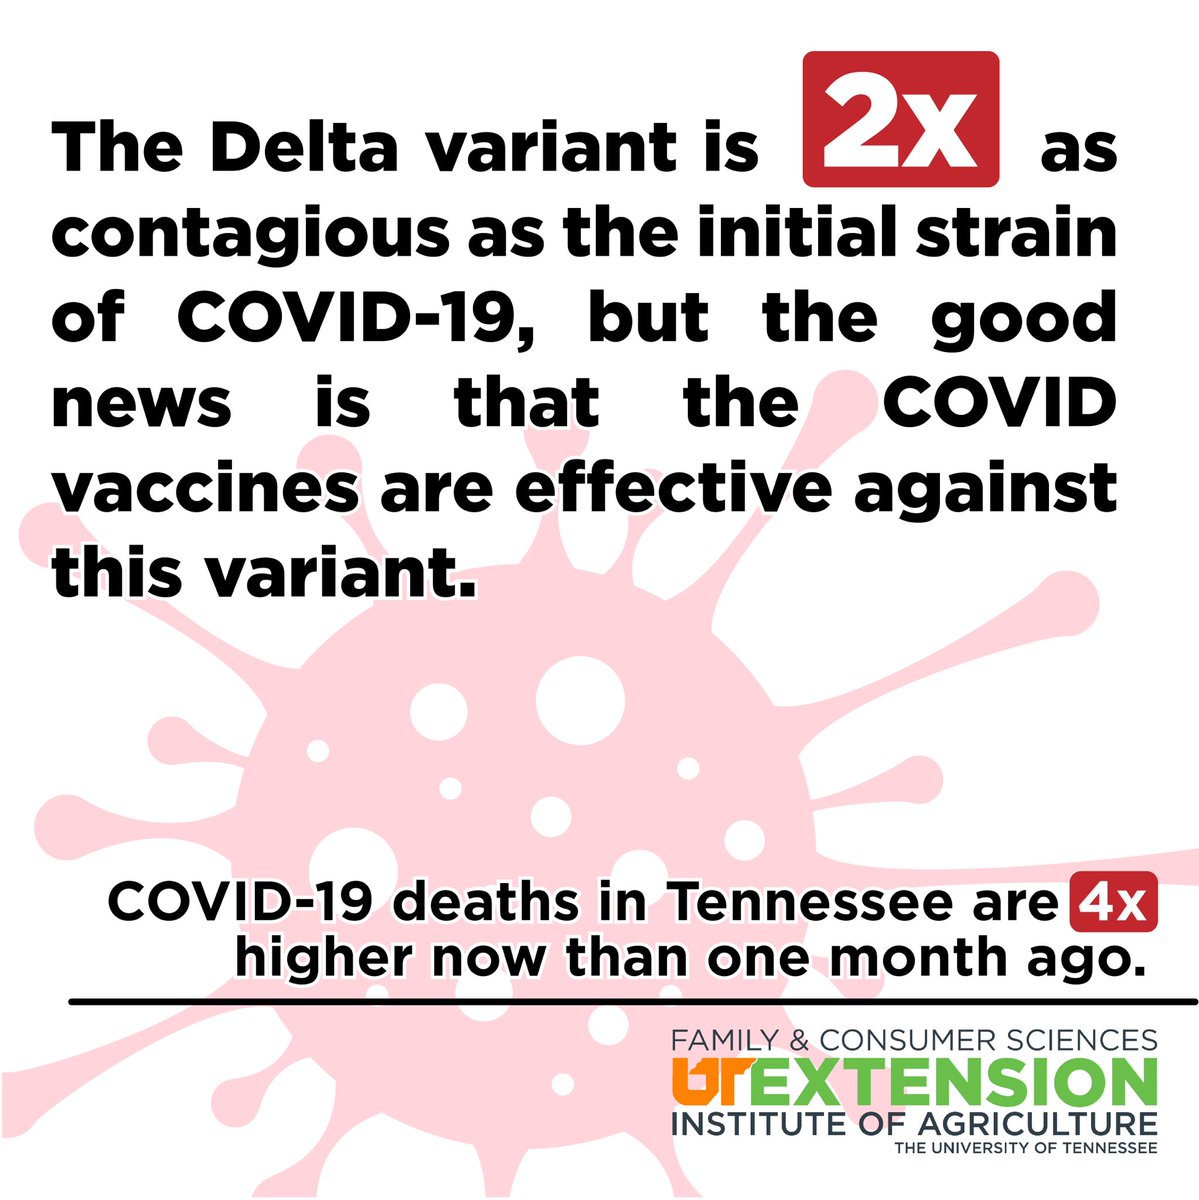 The Delta variant is 2x as contagious as the initial strain of COVID-19, but the good news is that the COVID vaccines are effective against this variant. 7-day average; data from experience.arcgis.com/experience/885… More info at vaccine.gov @UTExt_Dean @UTExtensionFCS @UTIAg